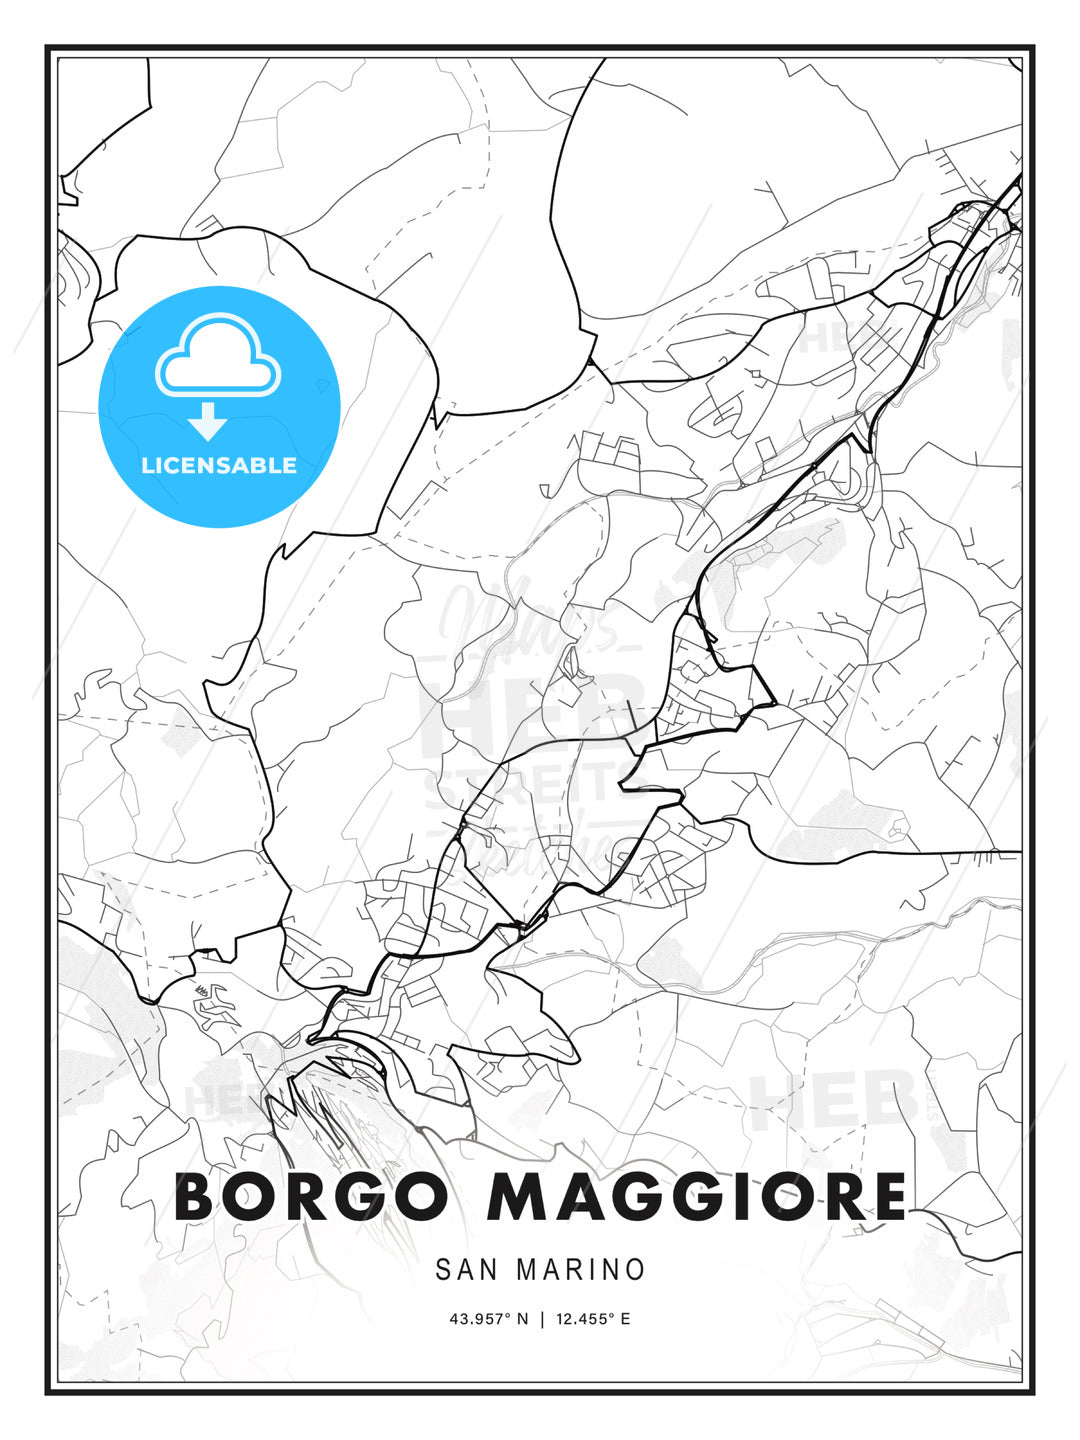 Borgo Maggiore, San Marino, Modern Print Template in Various Formats - HEBSTREITS Sketches